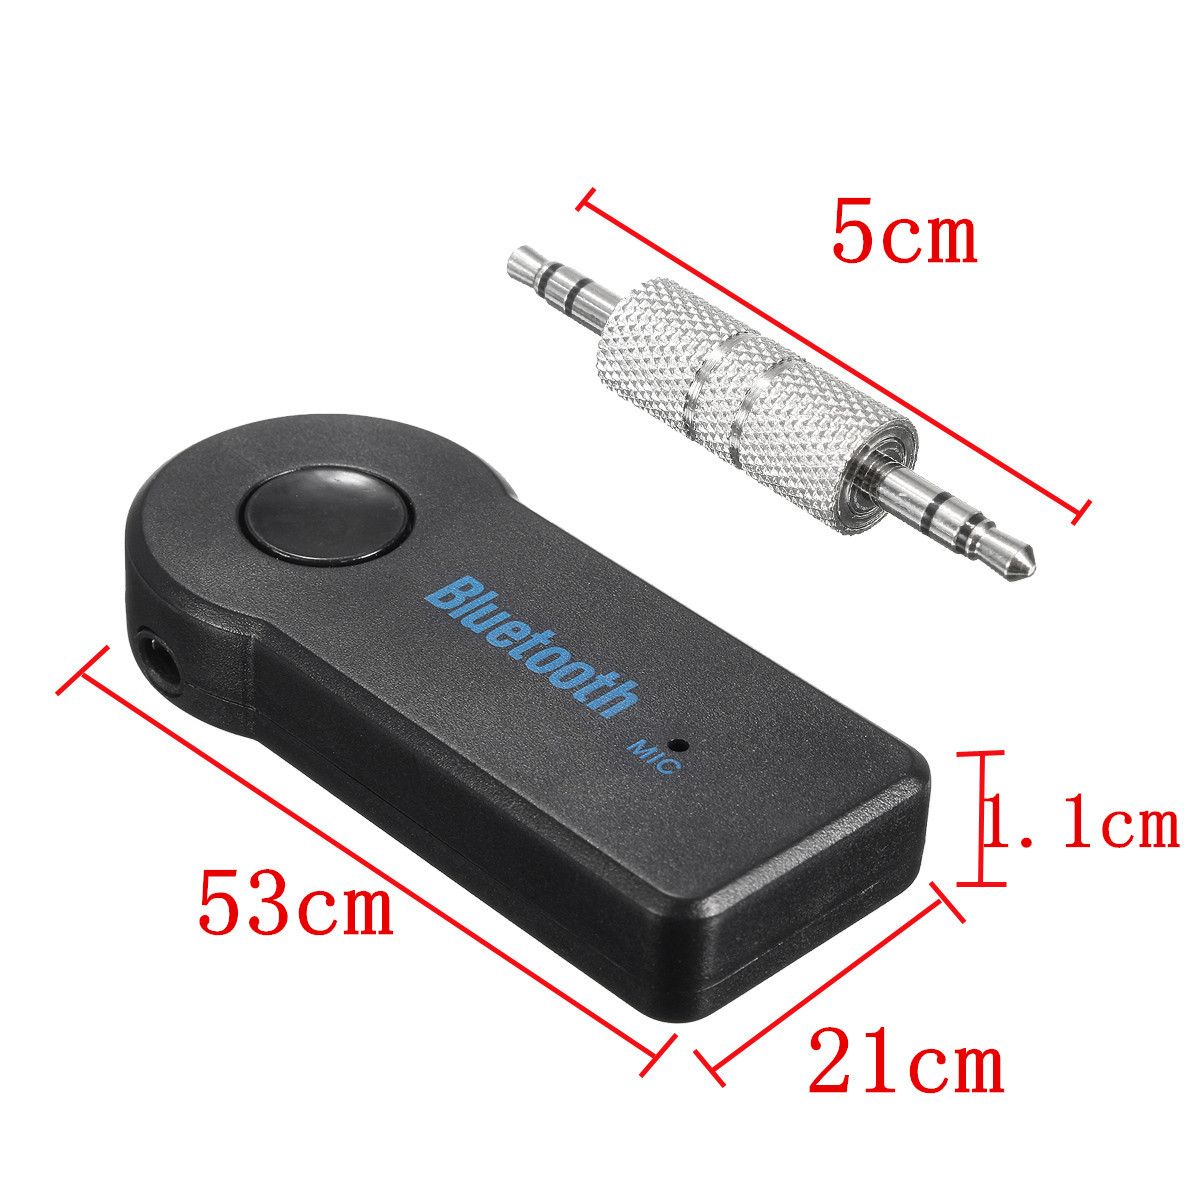 35mm-AUX-Wireless-30-bluetooth-Audio-Music-Receiver-Adapter-Stereo-for-Mobile-Phone-1106388